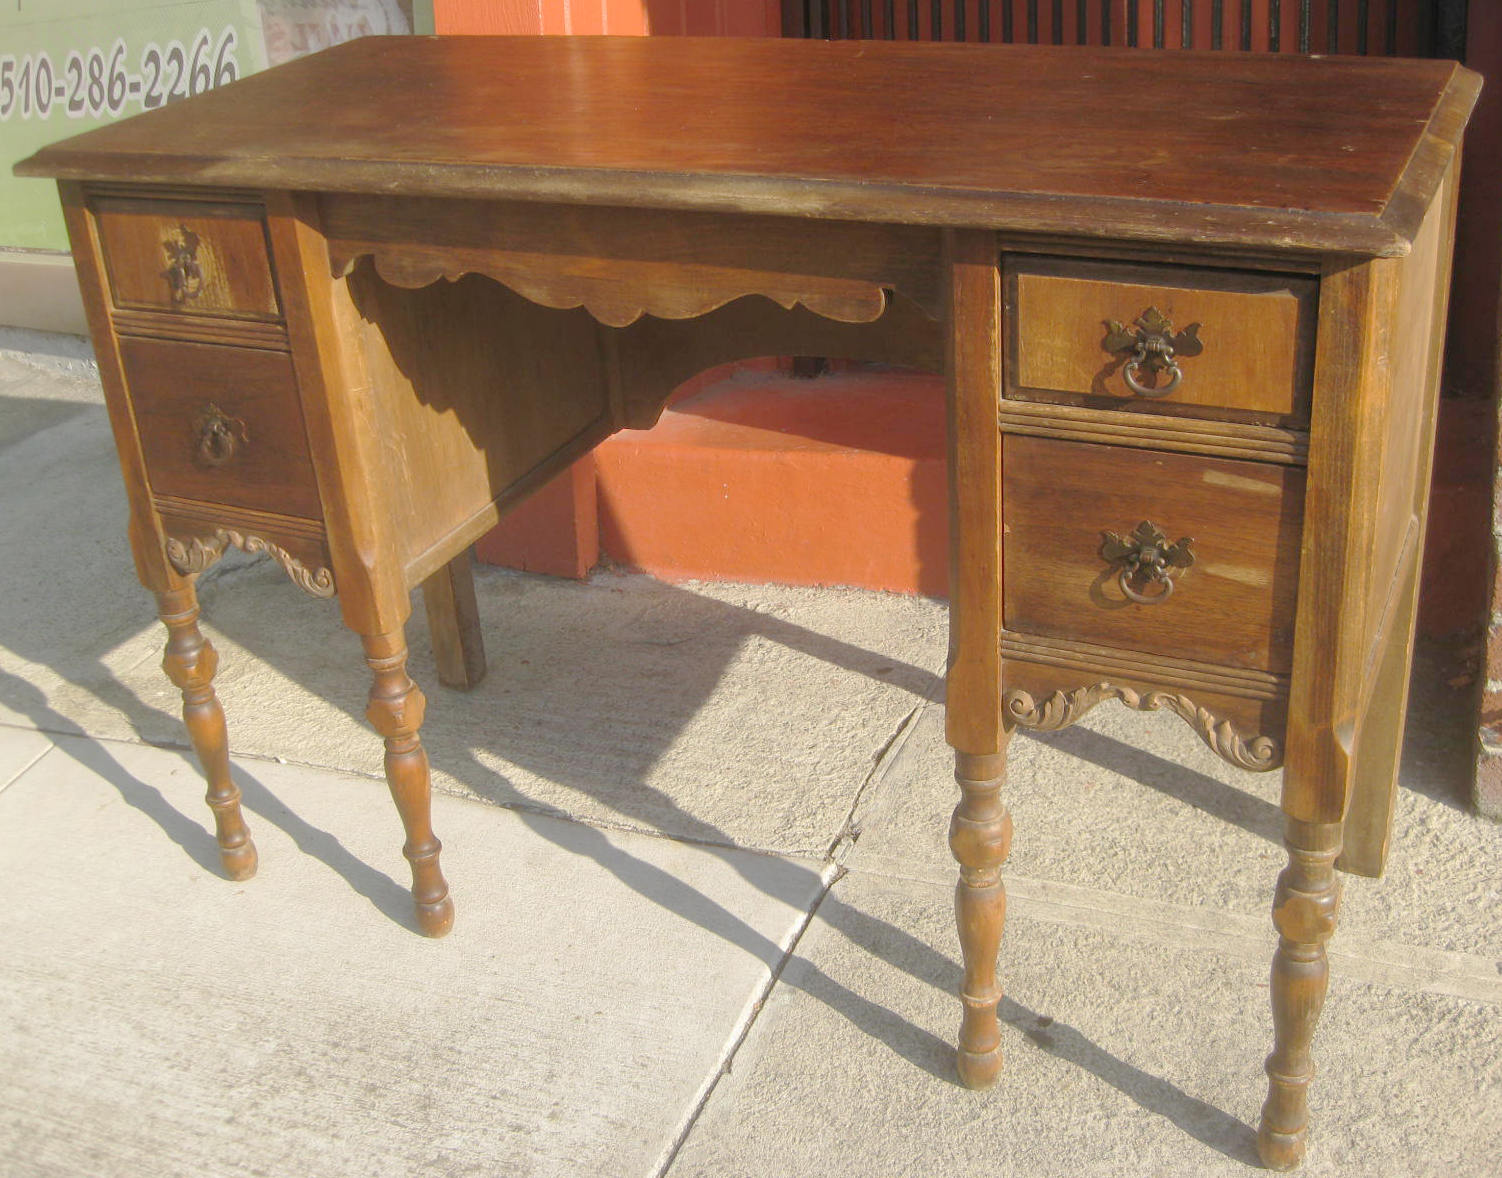 UHURU FURNITURE & COLLECTIBLES: SOLD - Small Wooden Desk - $65